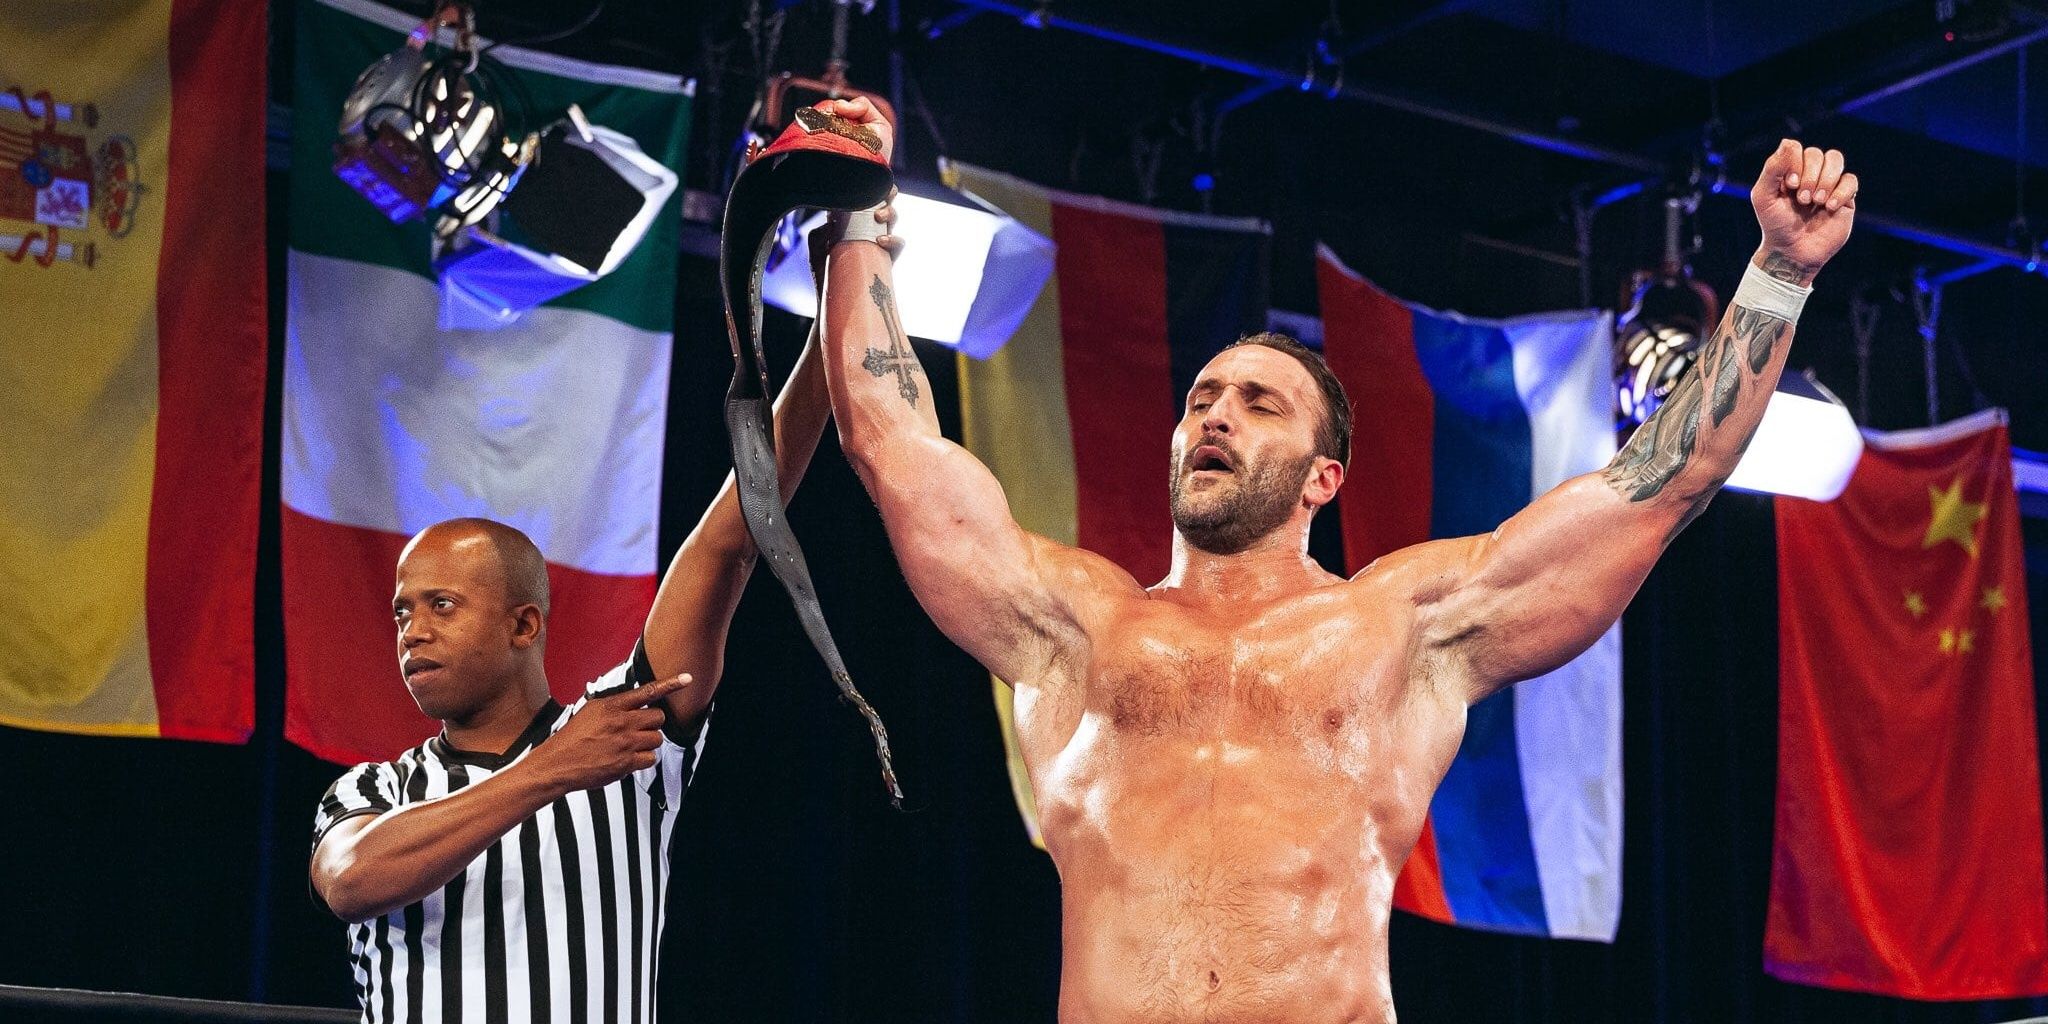 Chris Masters within the NWA Cropped